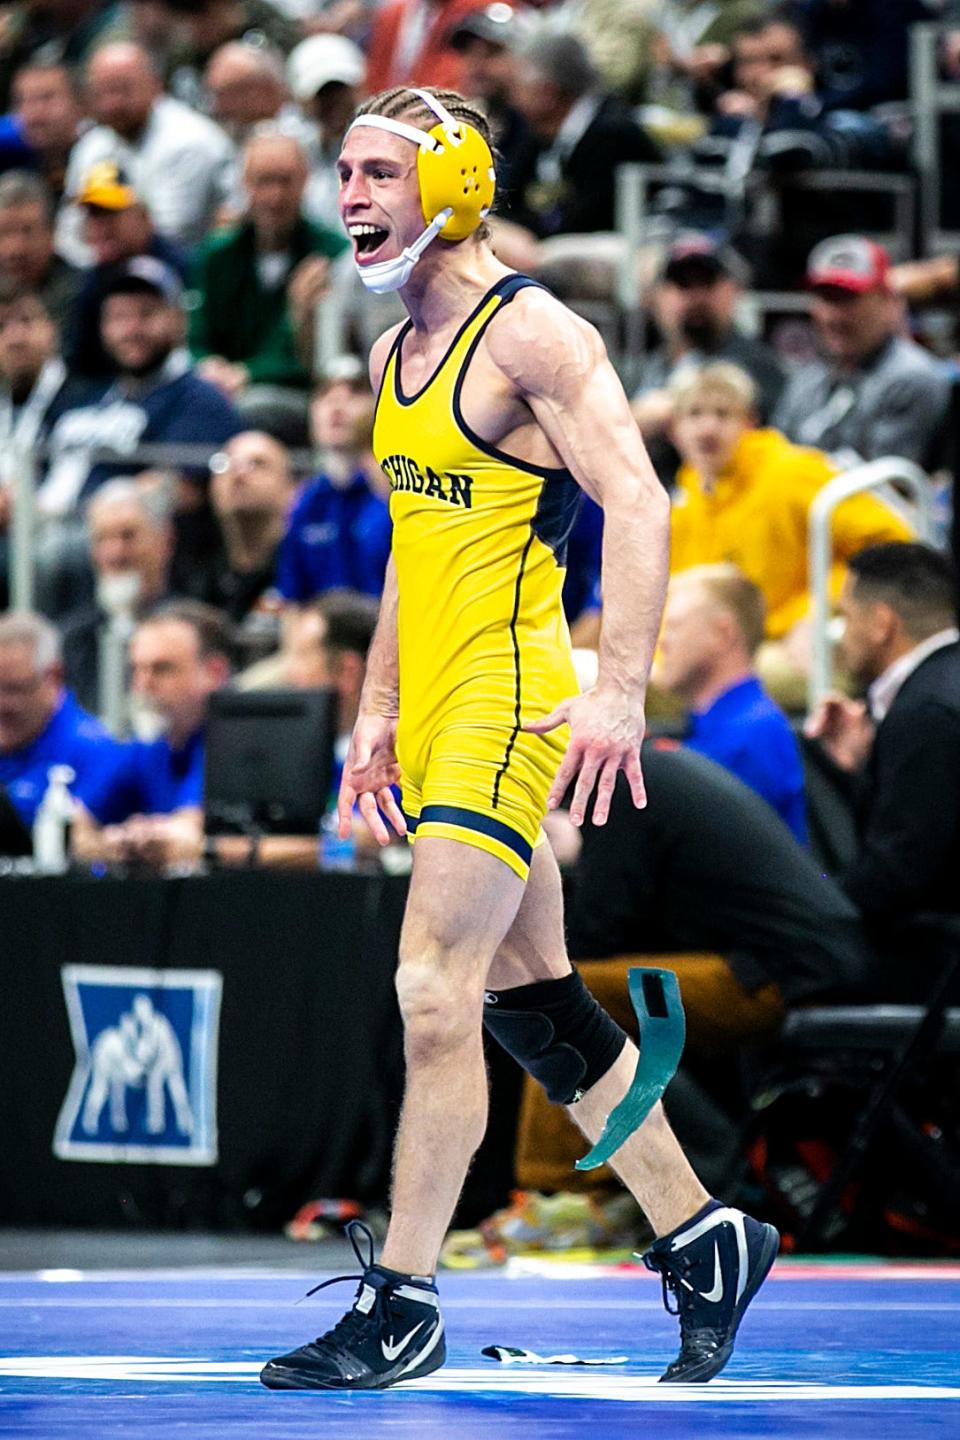 Michigan's Nick Suriano reacts after scoring a fall at 125 pounds in the quarterfinals during the third session of the NCAA Division I Wrestling Championships, Friday, March 18, 2022, at Little Caesars Arena in Detroit, Mich.